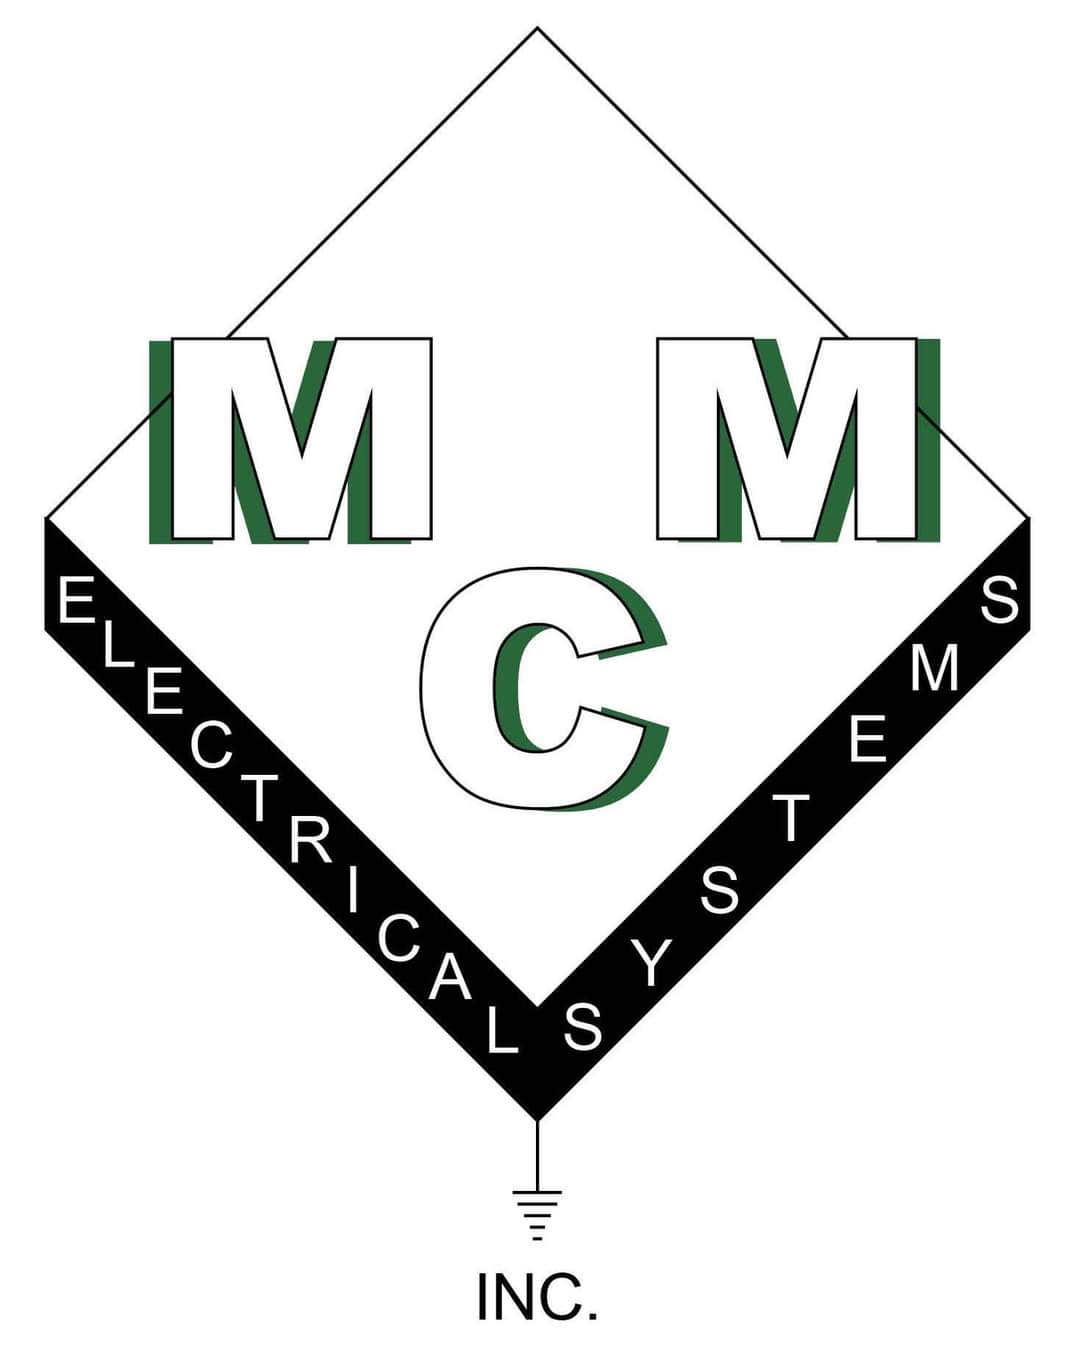 MCM Electrical Systems Logo